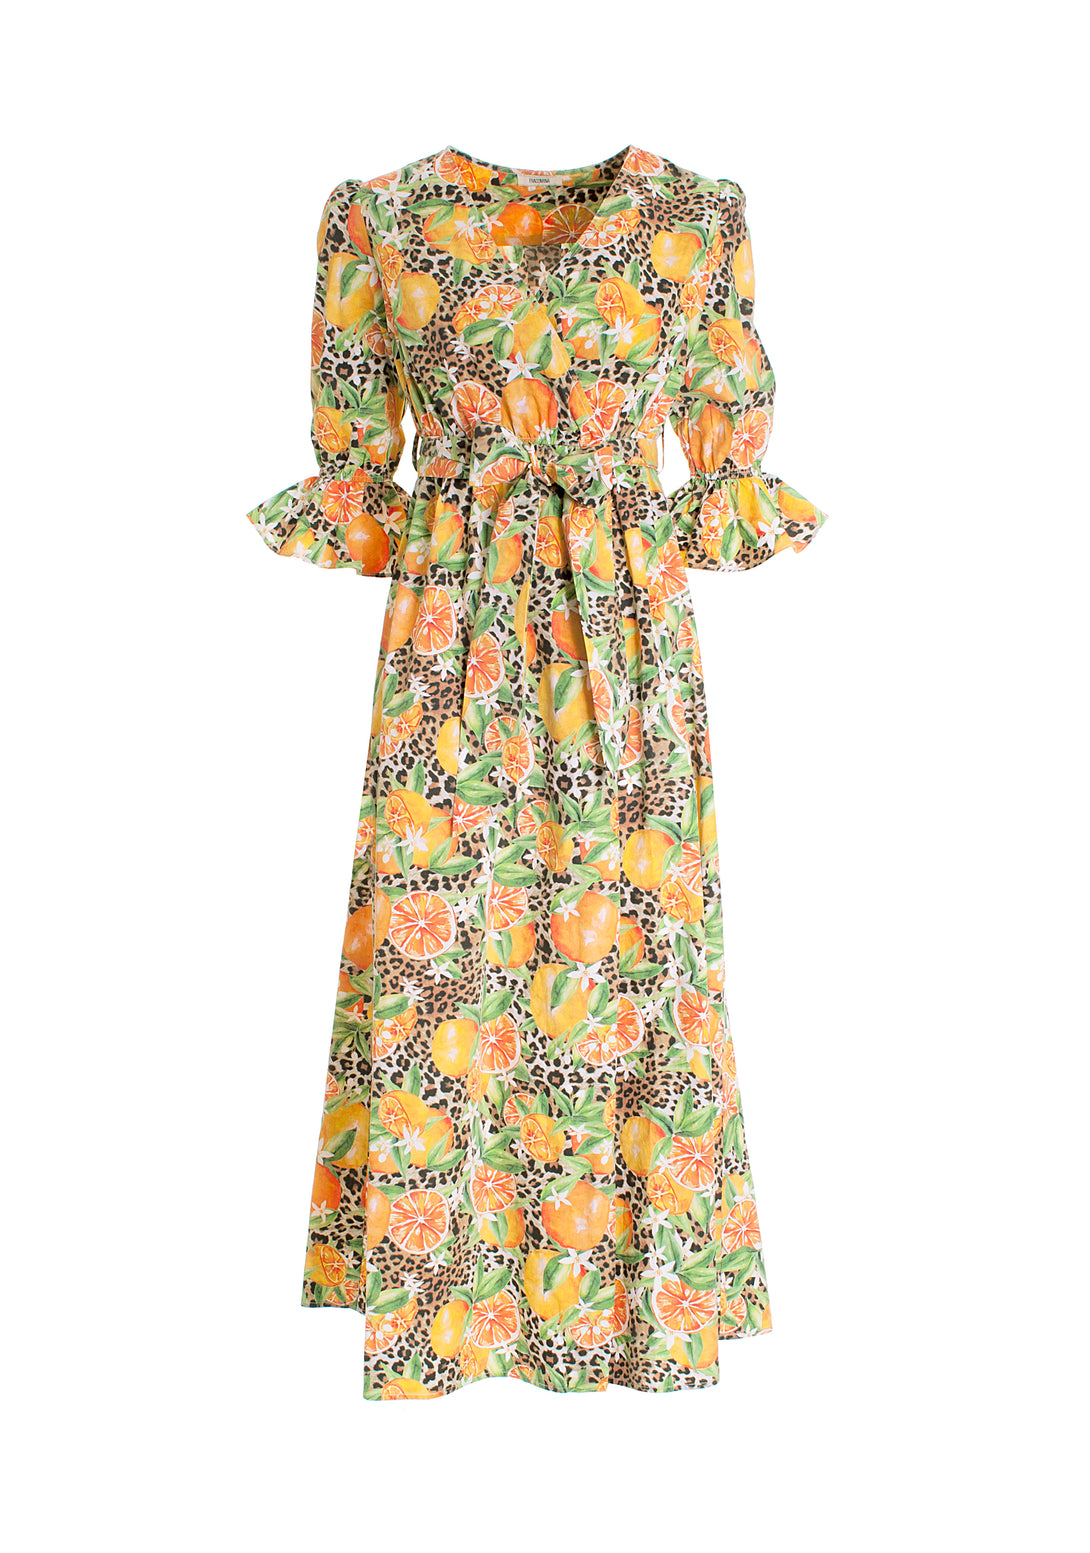 Long wrap dress regular fit made in cotton with tropical pattern